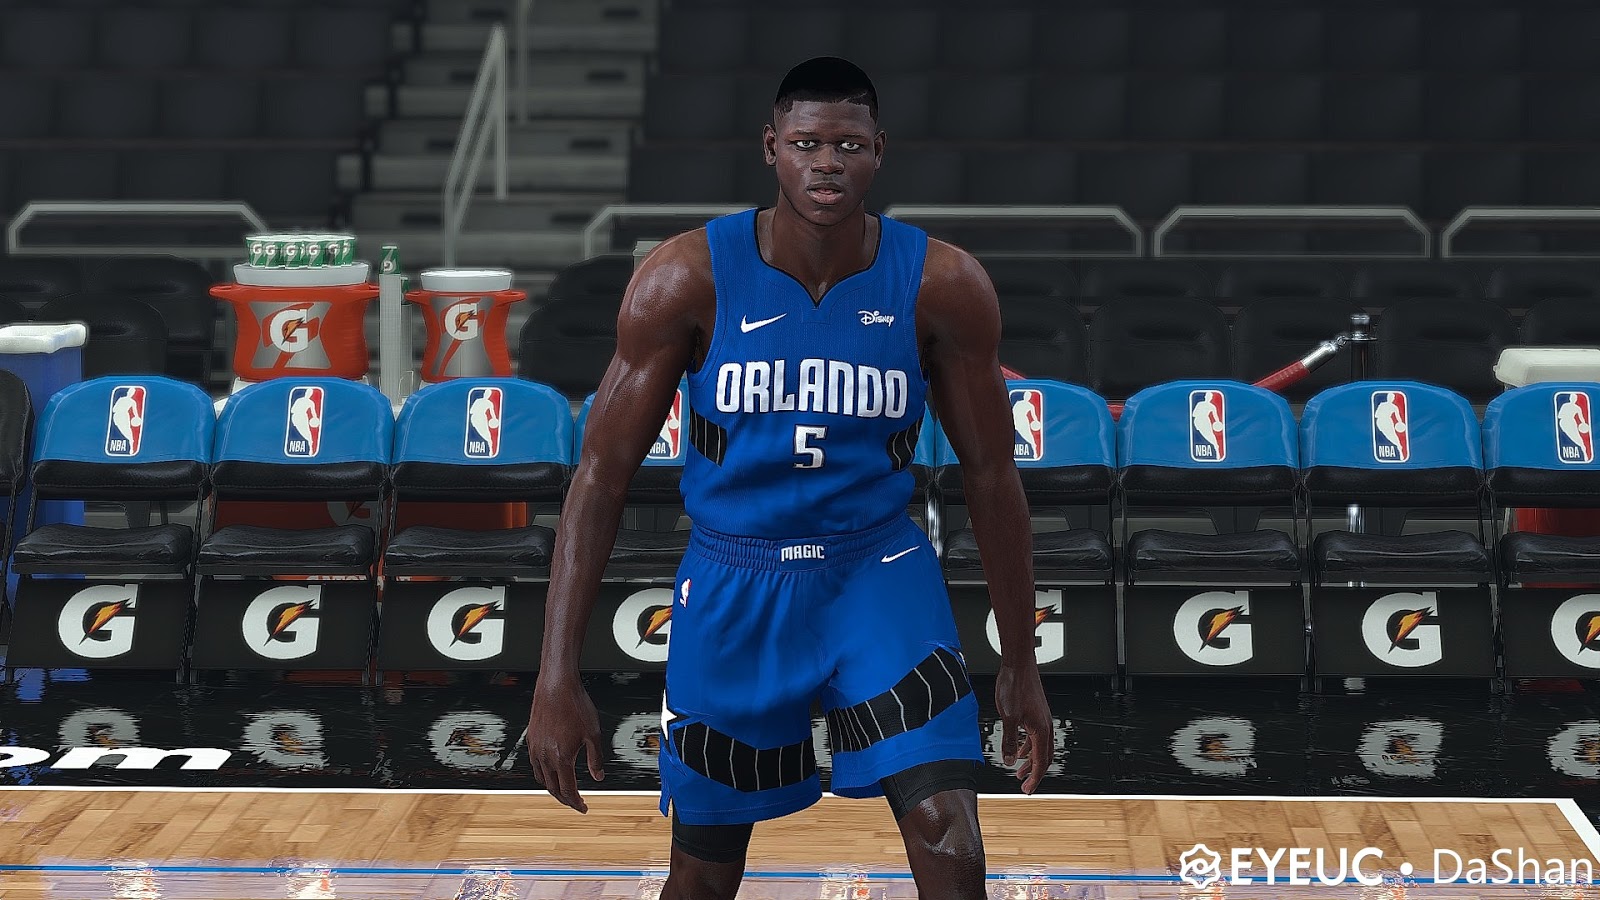 Mo Bamba Hair And Body Model v2 By DaShan FOR 2K20.